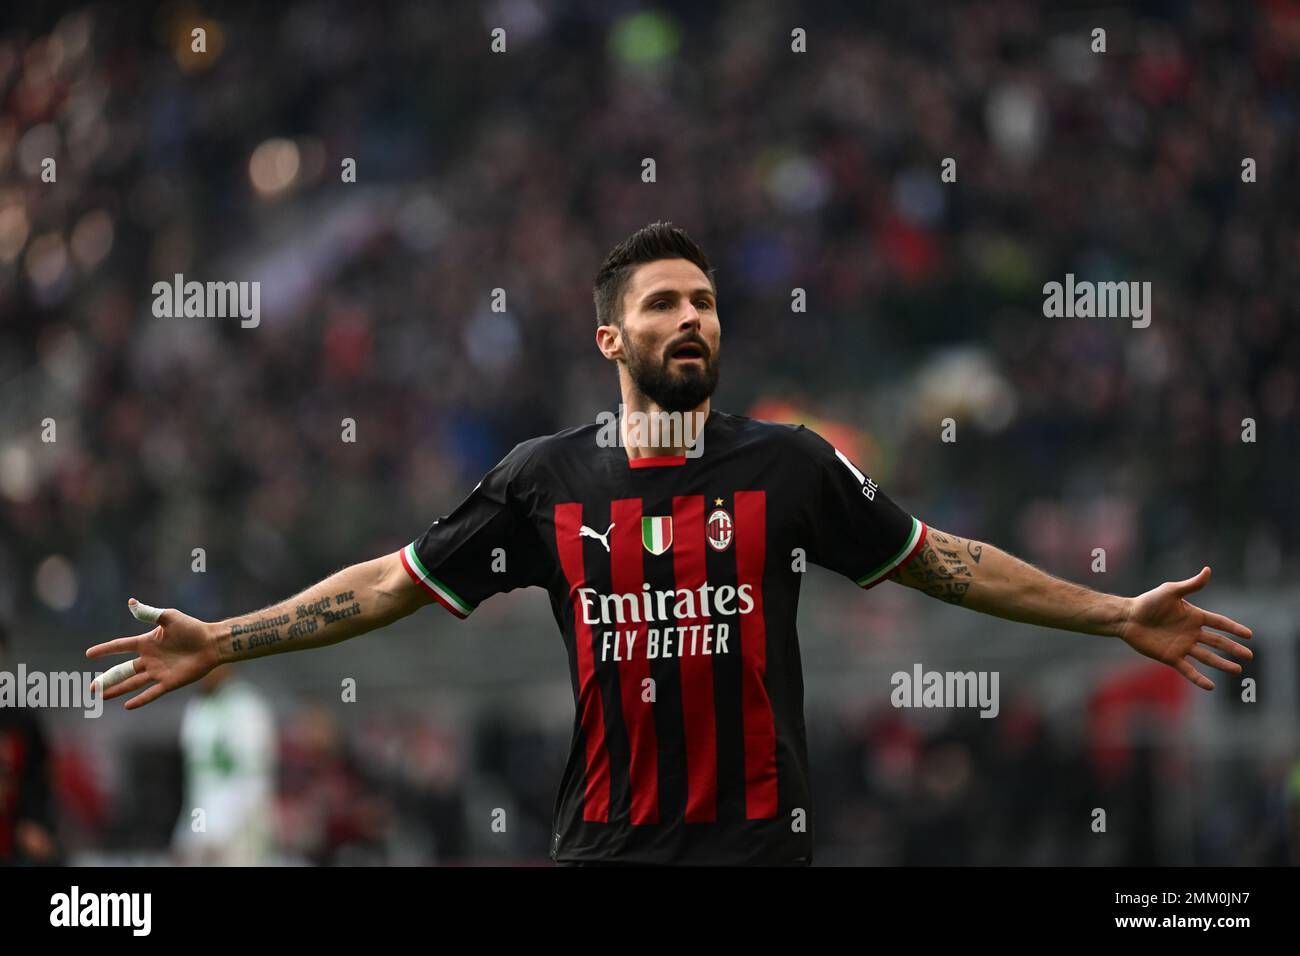 Milan, Italy. 29th Jan, 2023. Olivier of Ac Milan celebrating after a goal Italian Serie A football match between AC Milan and US Sassuolo on 29 January 2023